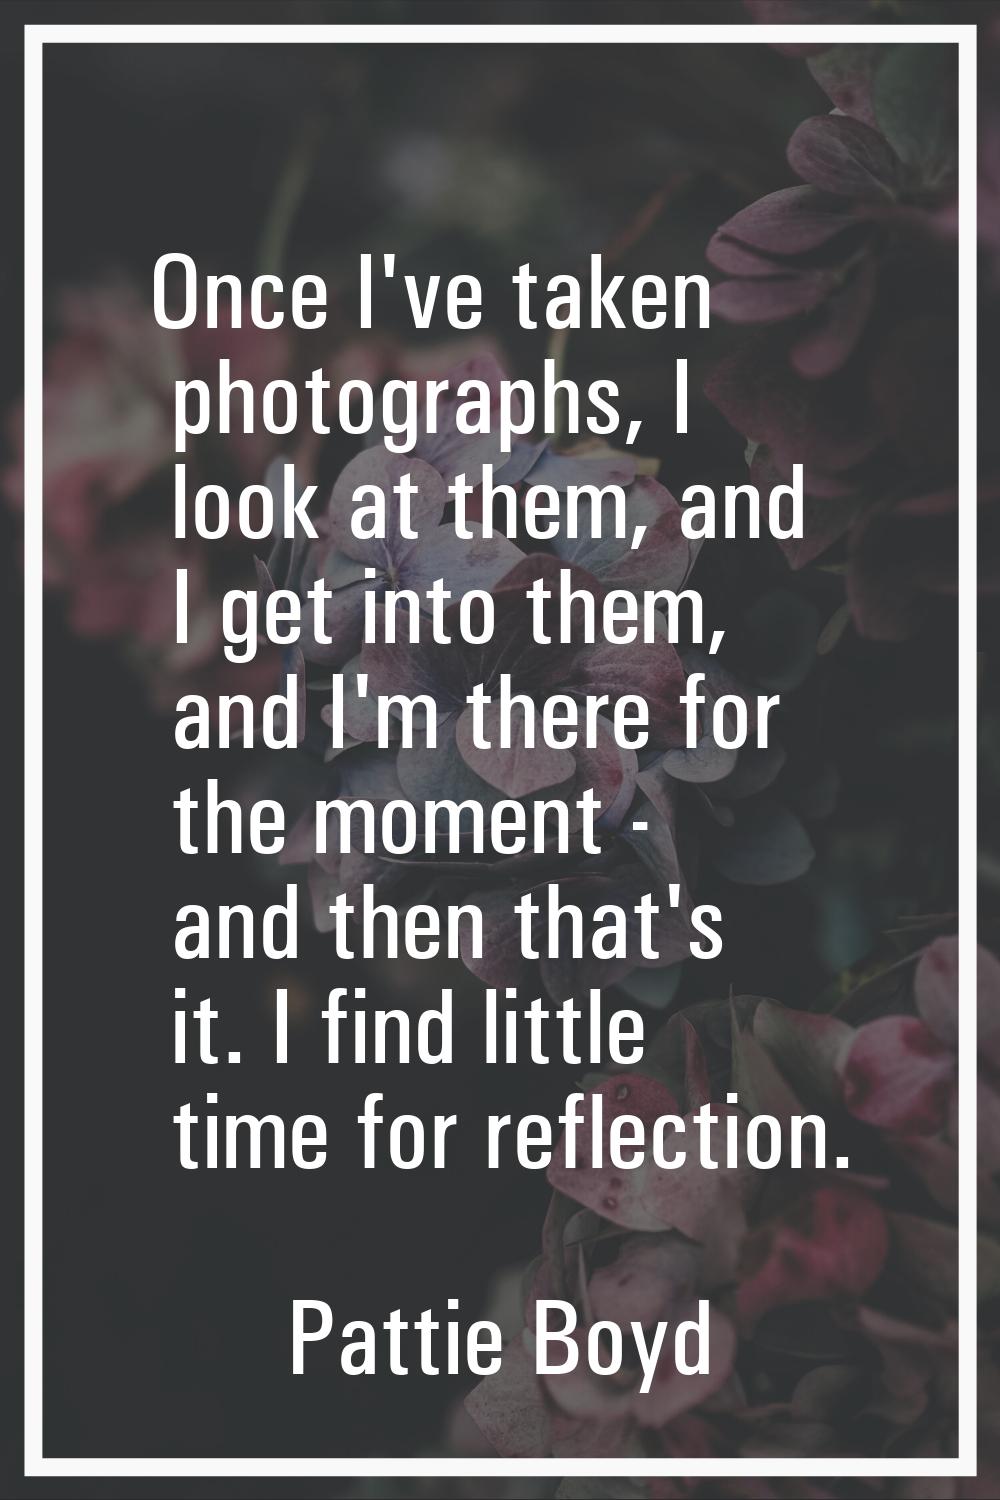 Once I've taken photographs, I look at them, and I get into them, and I'm there for the moment - an